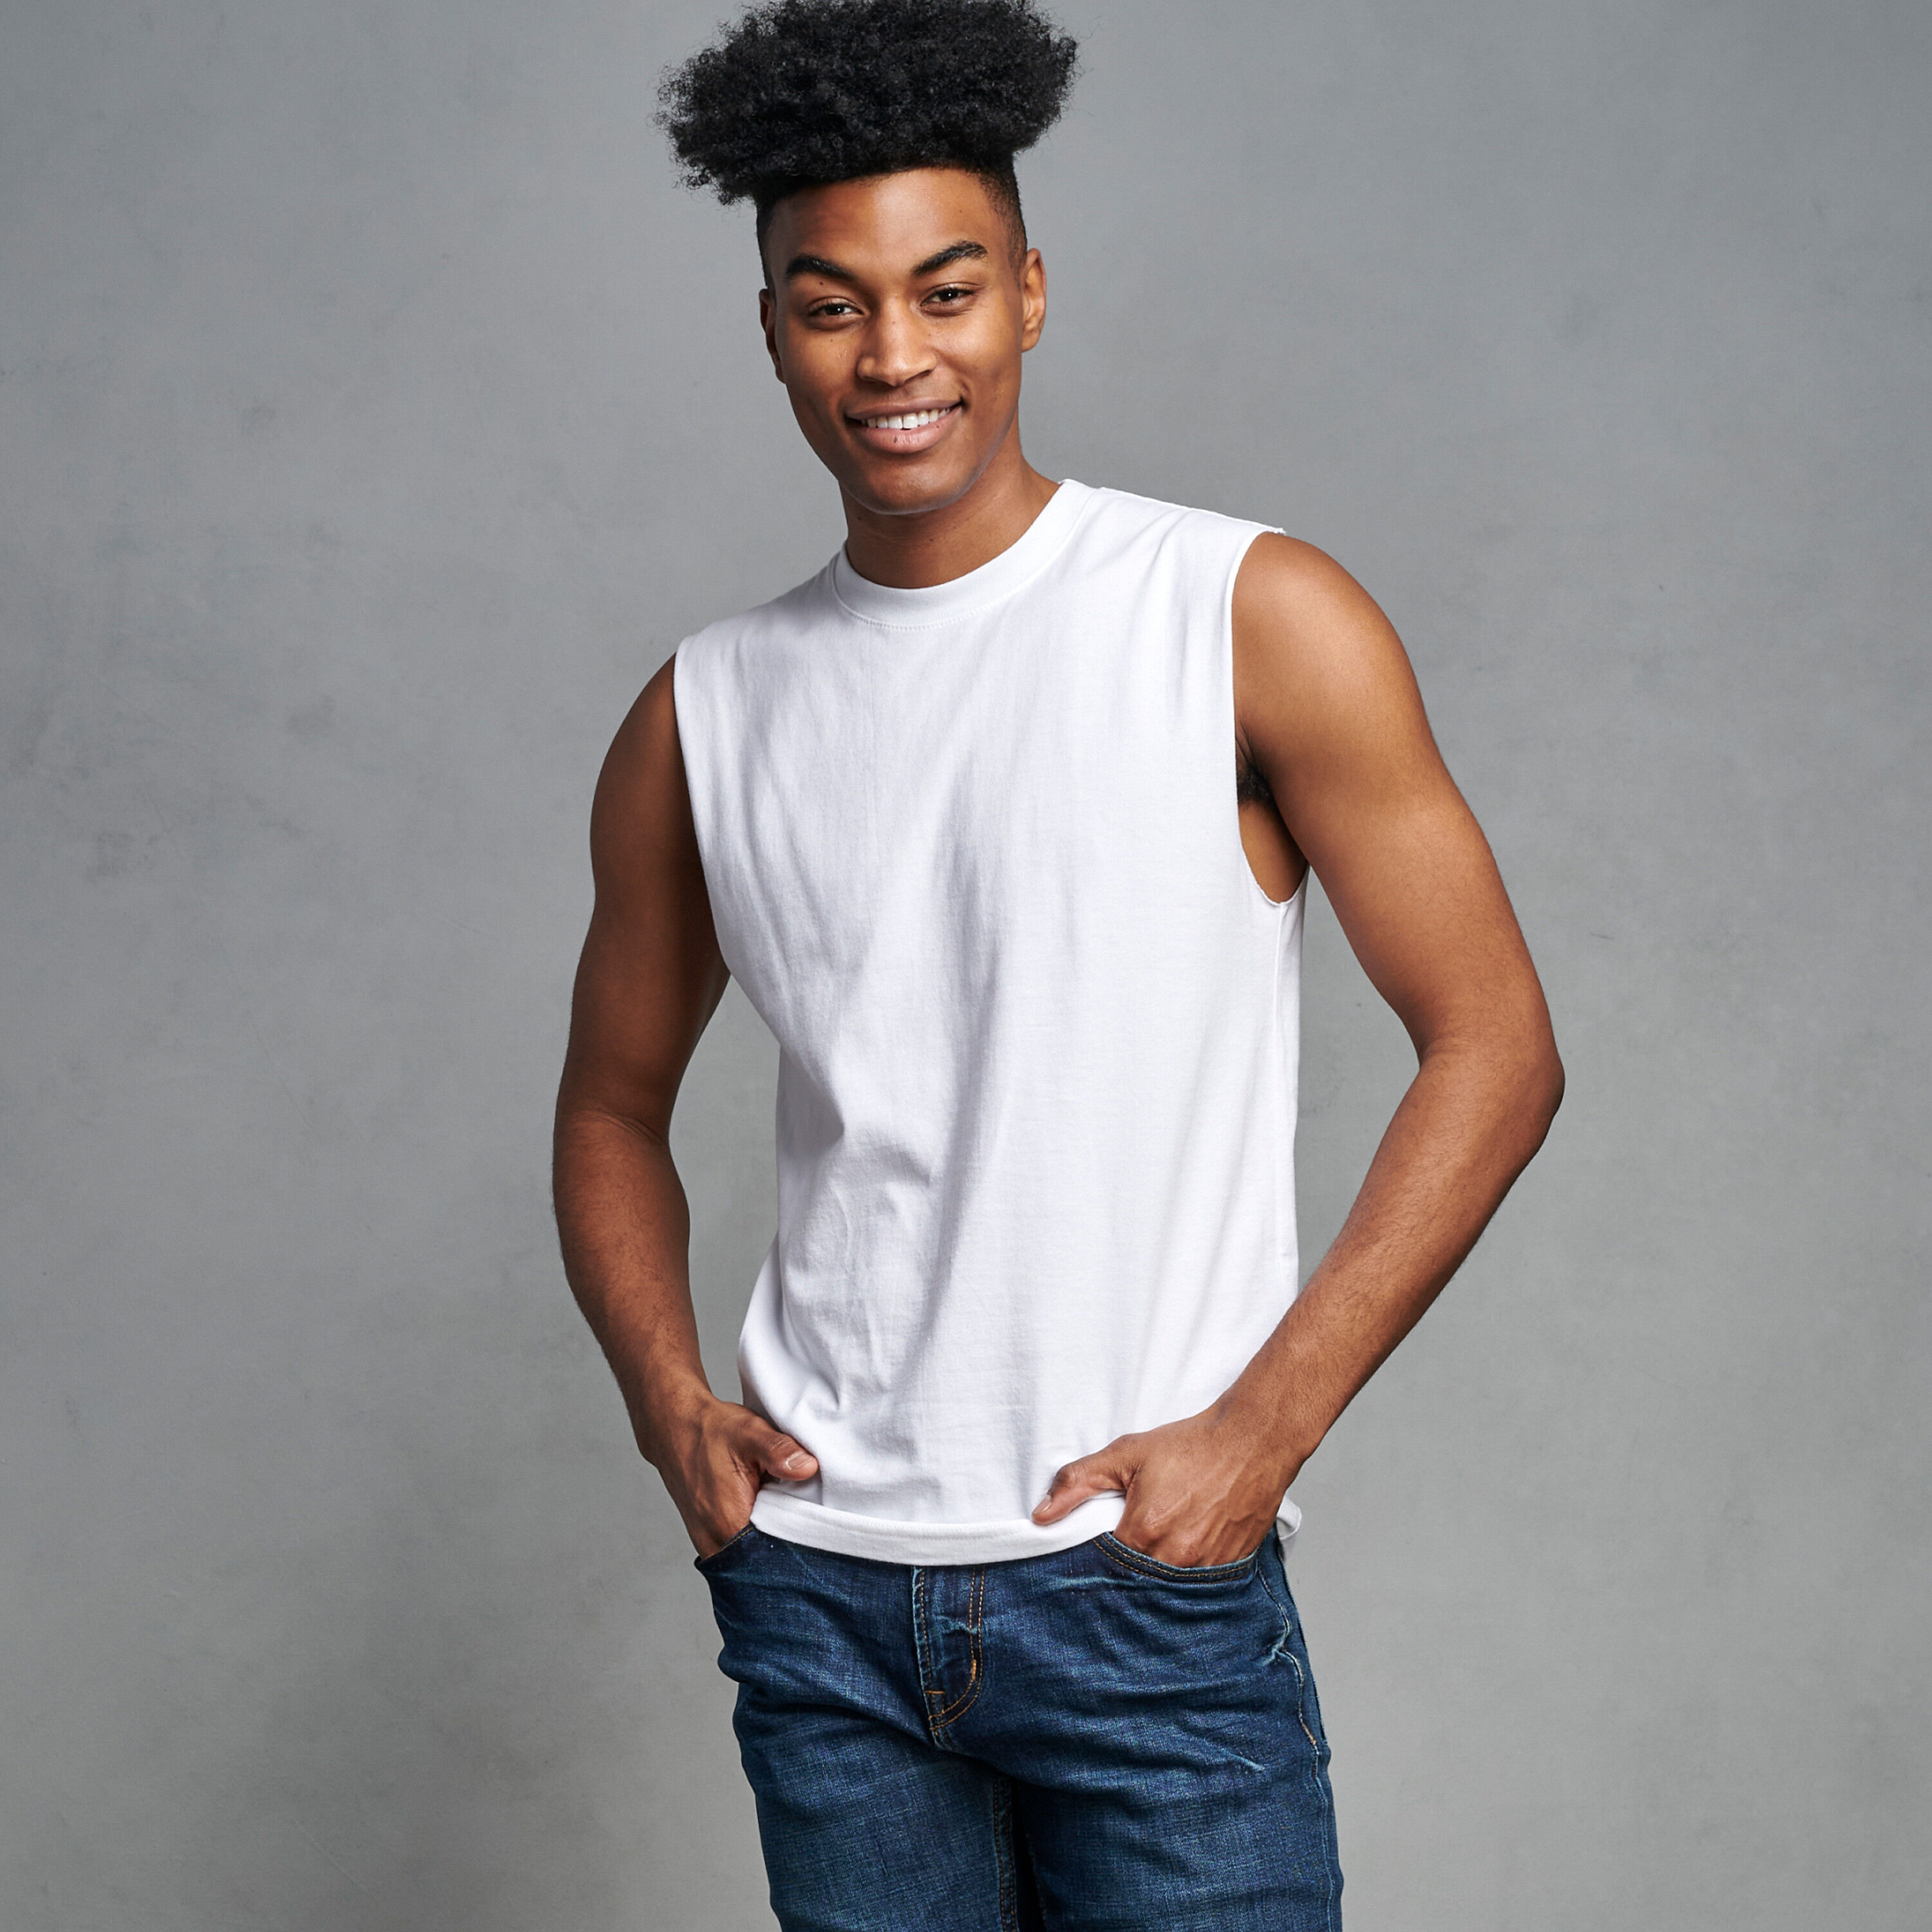 russell muscle shirt